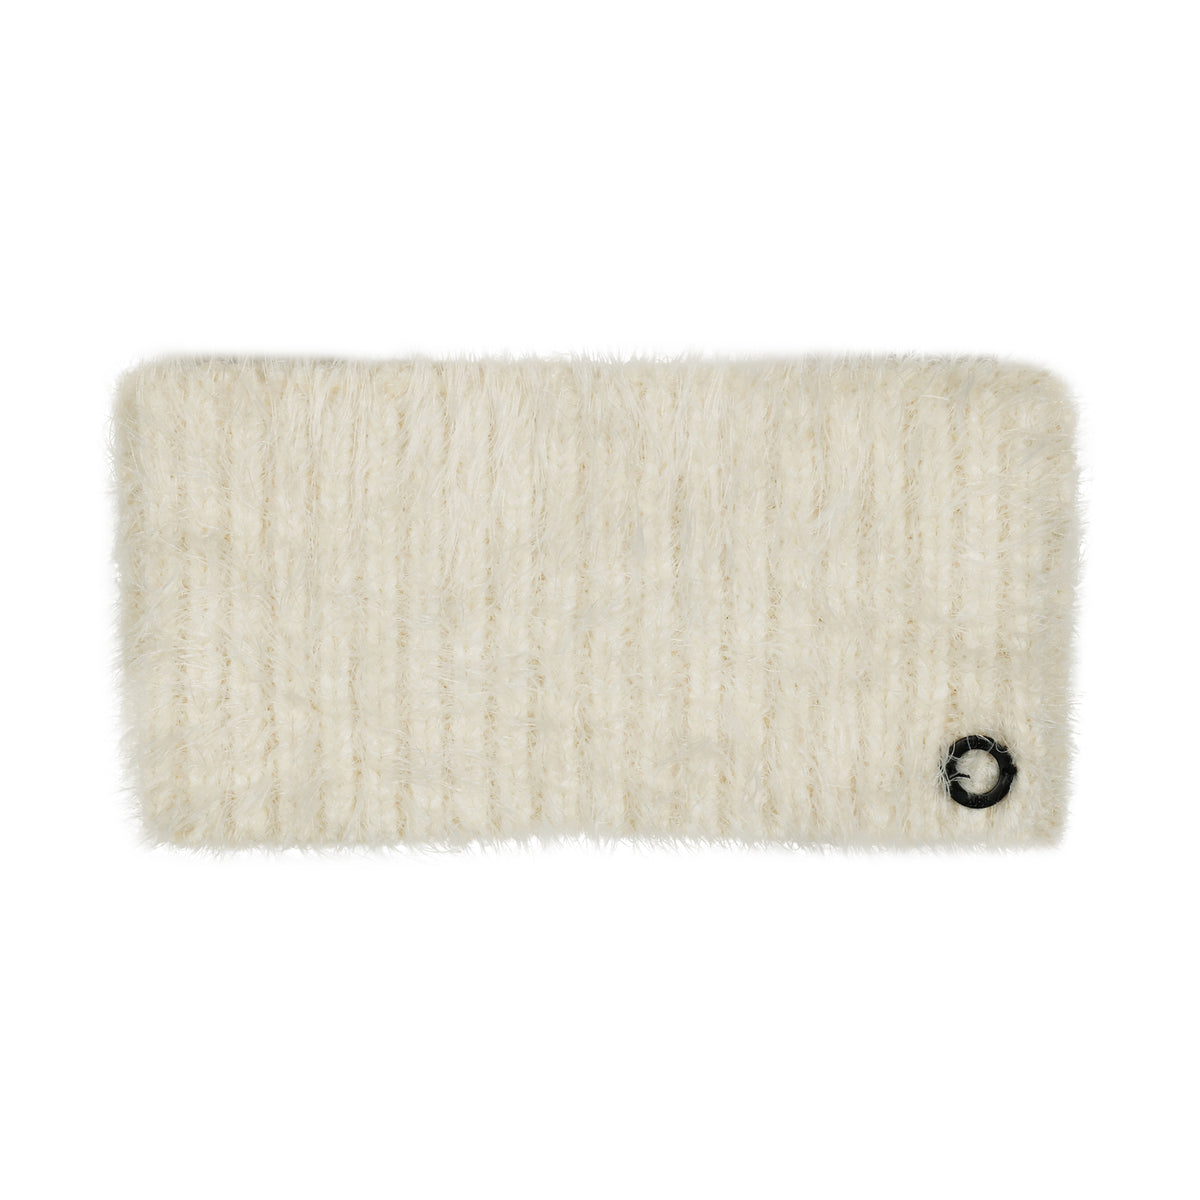 Mohair Ribbed Band